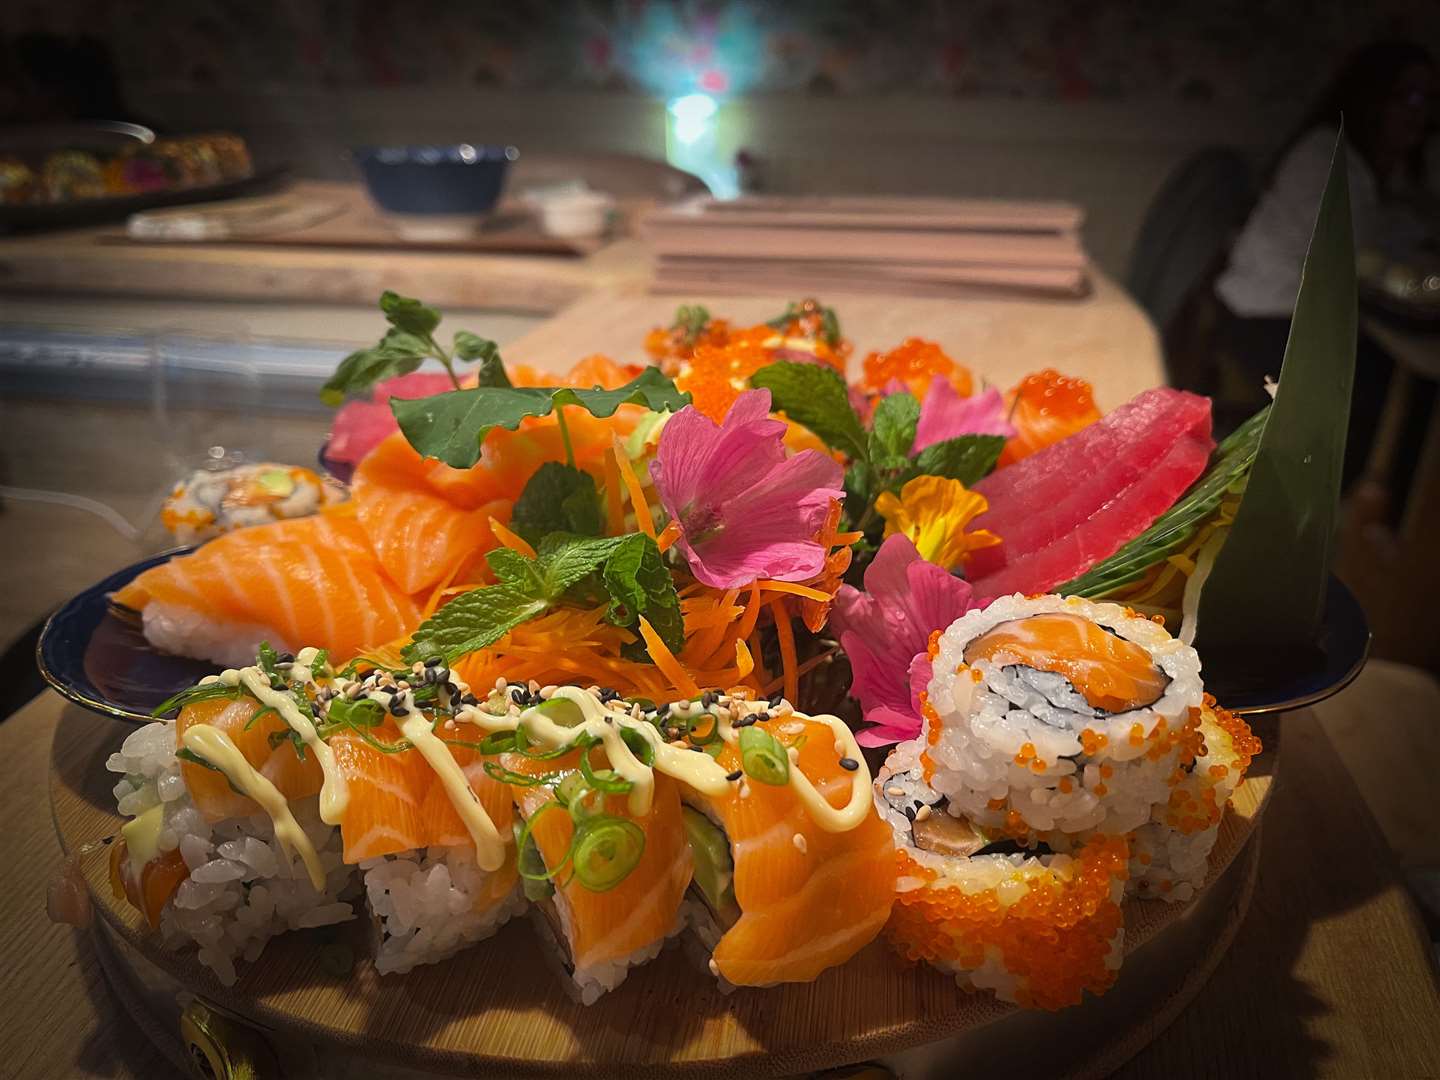 A new Sushi experience is opening in Tonbridge